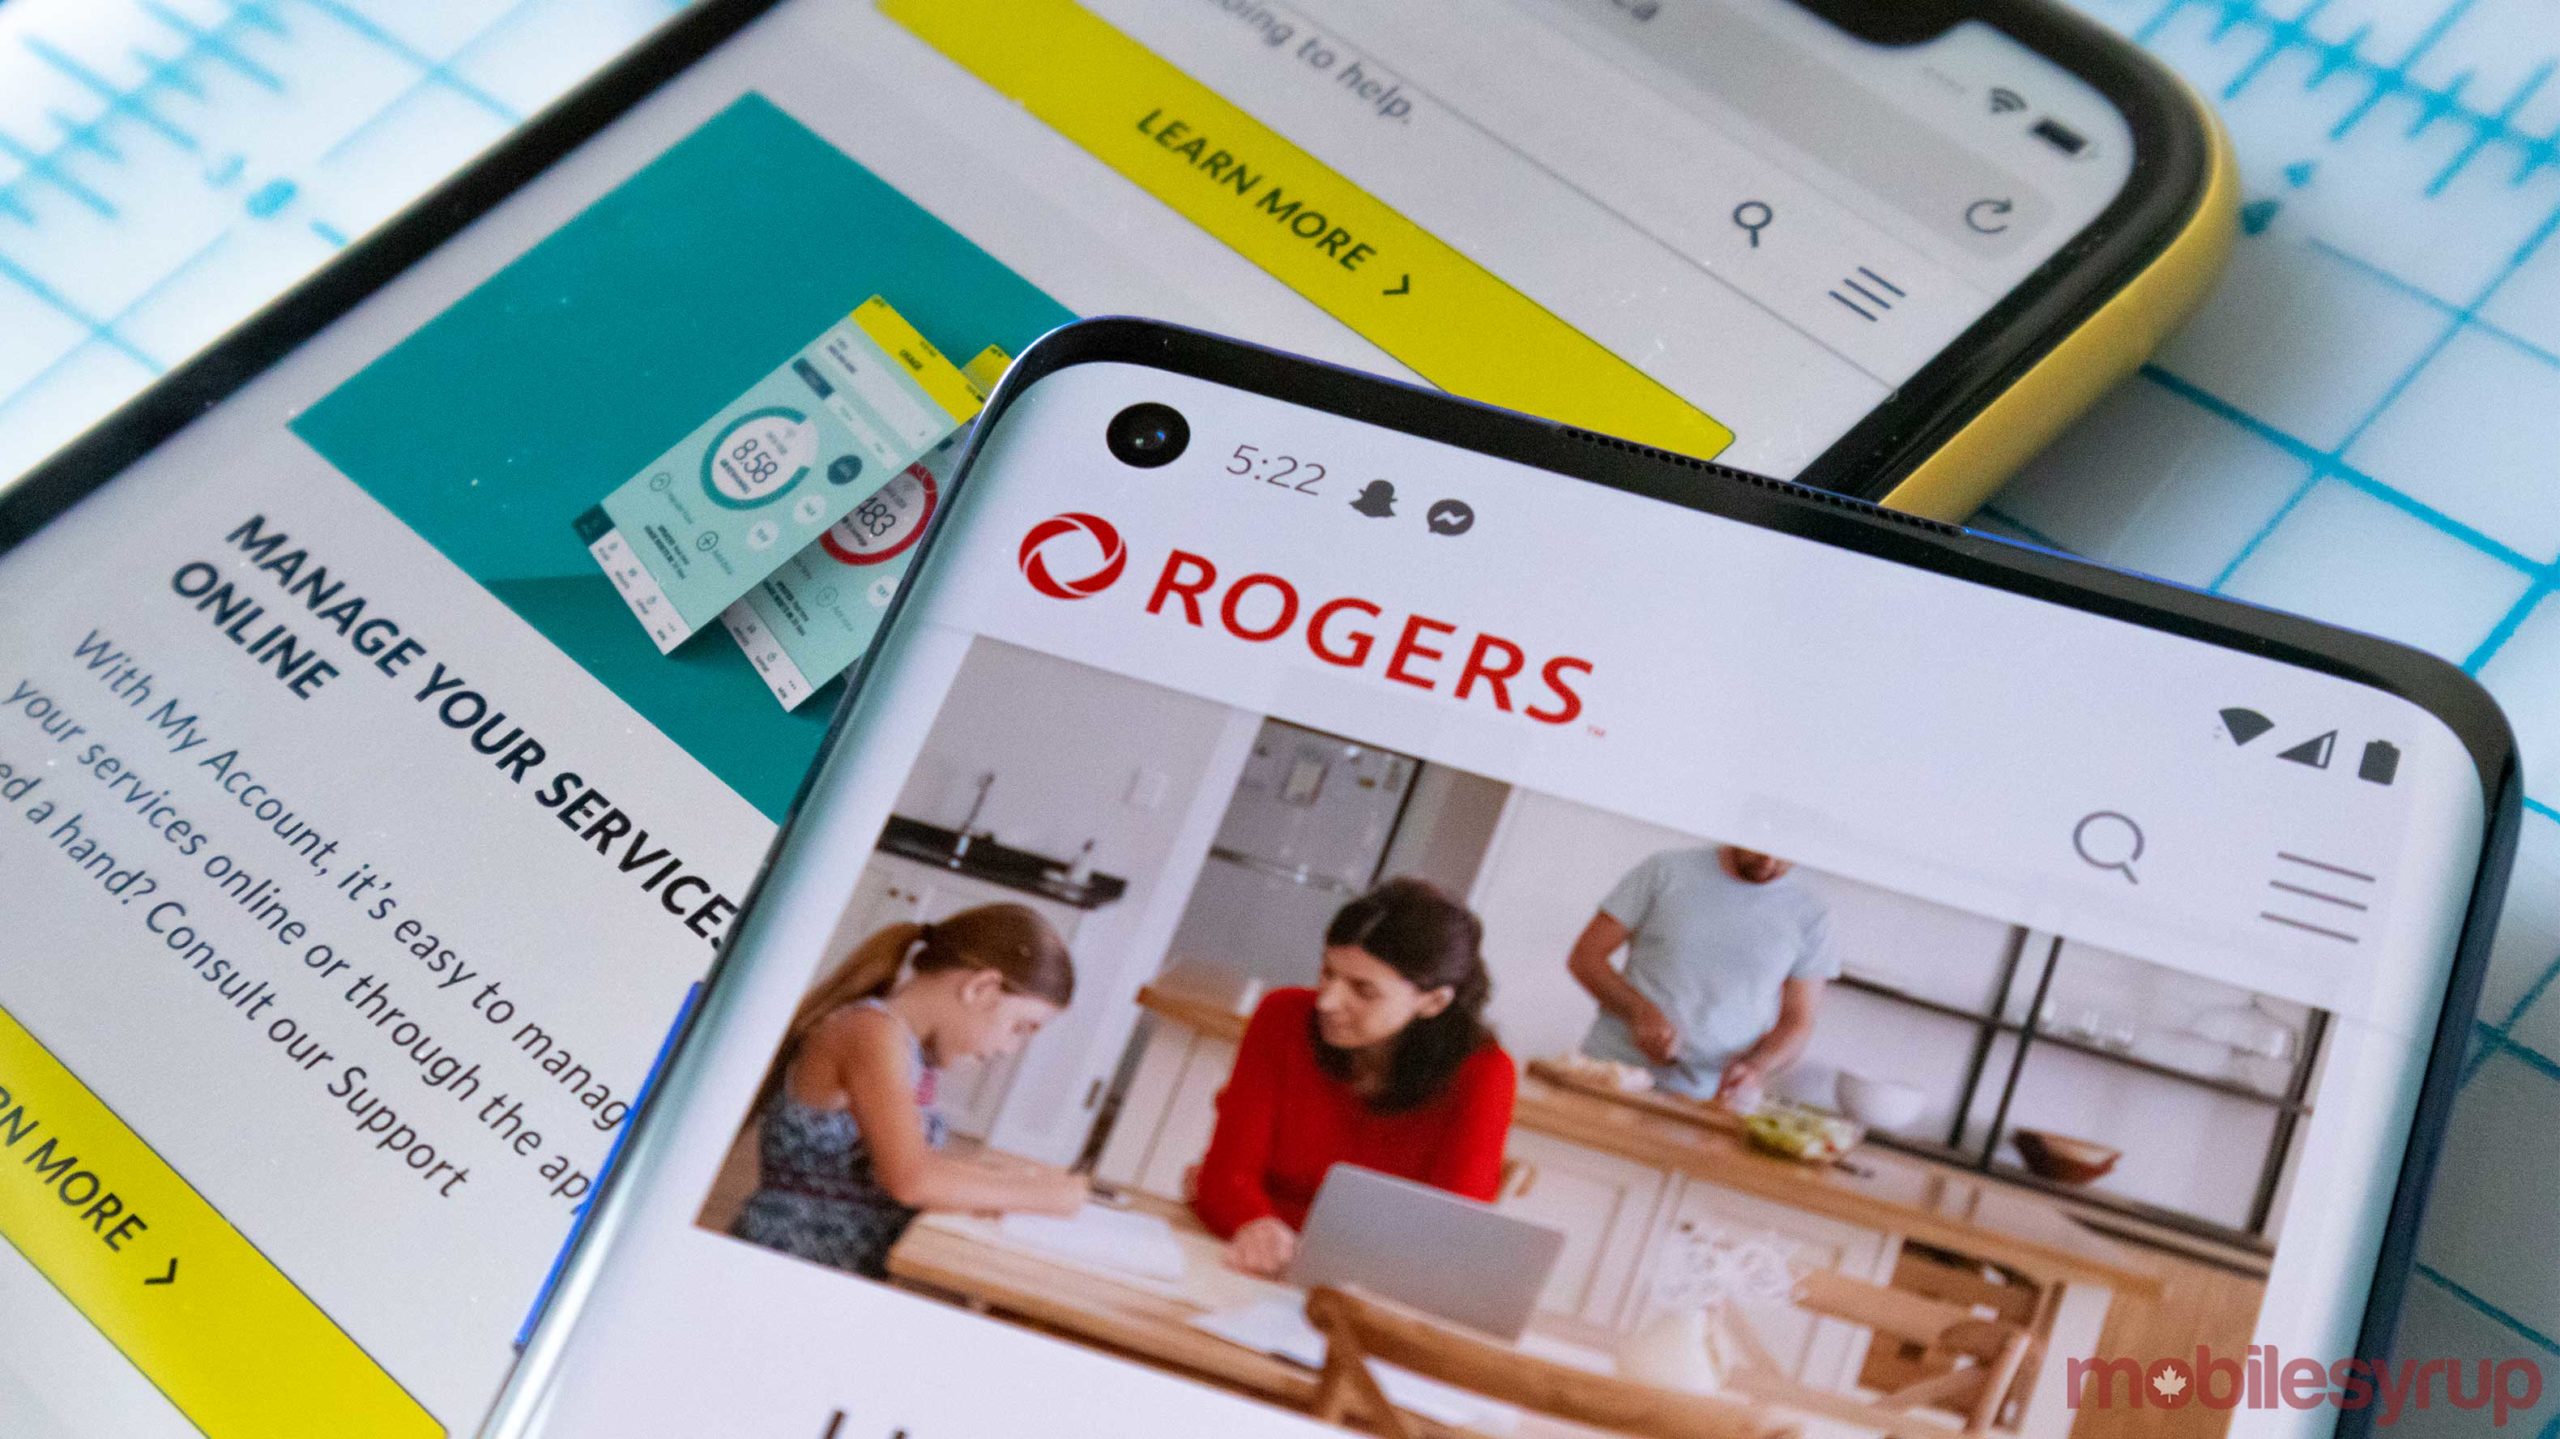 Rogers and Fido increasing U.S. daily roaming prices on March 29